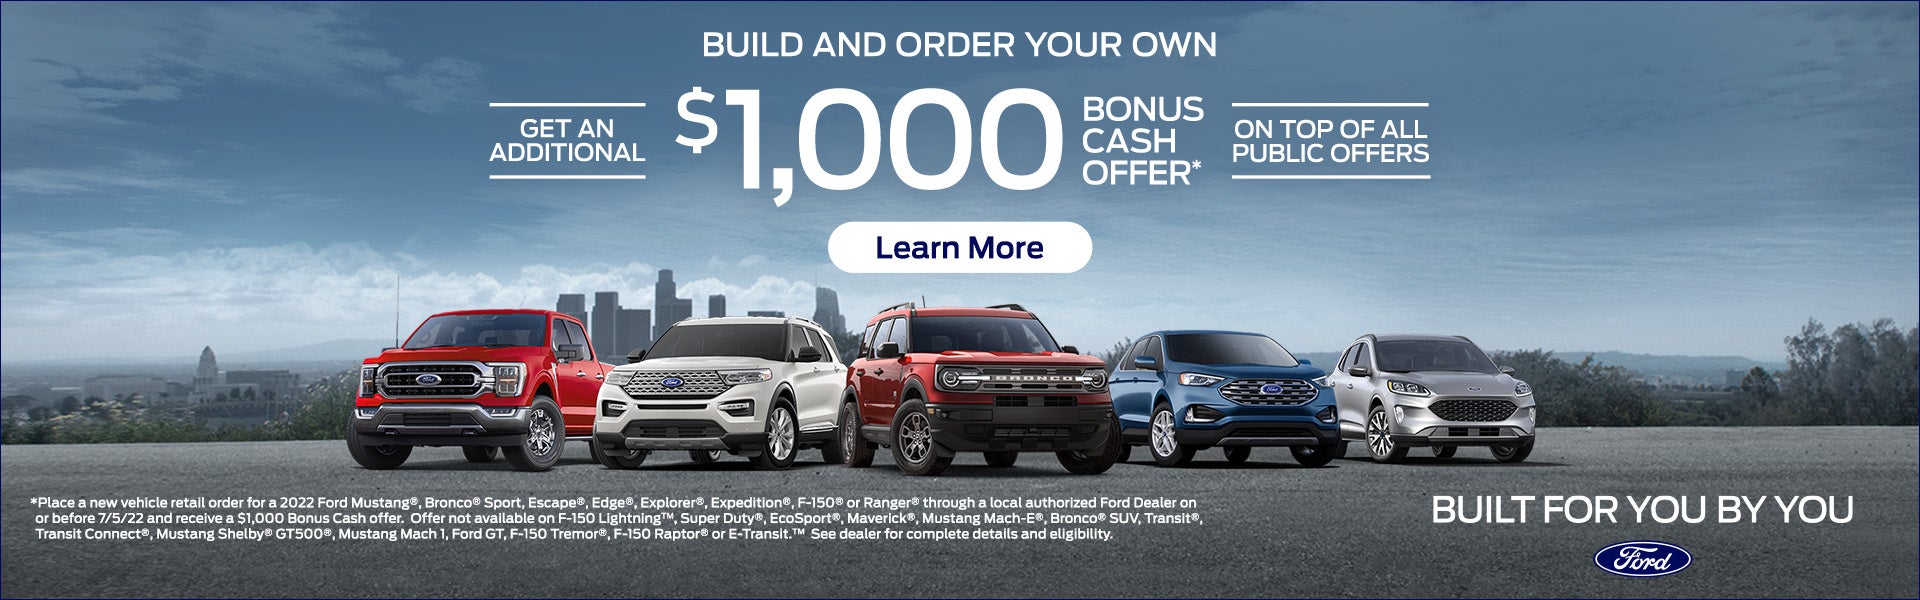 Build and Order your own Ford